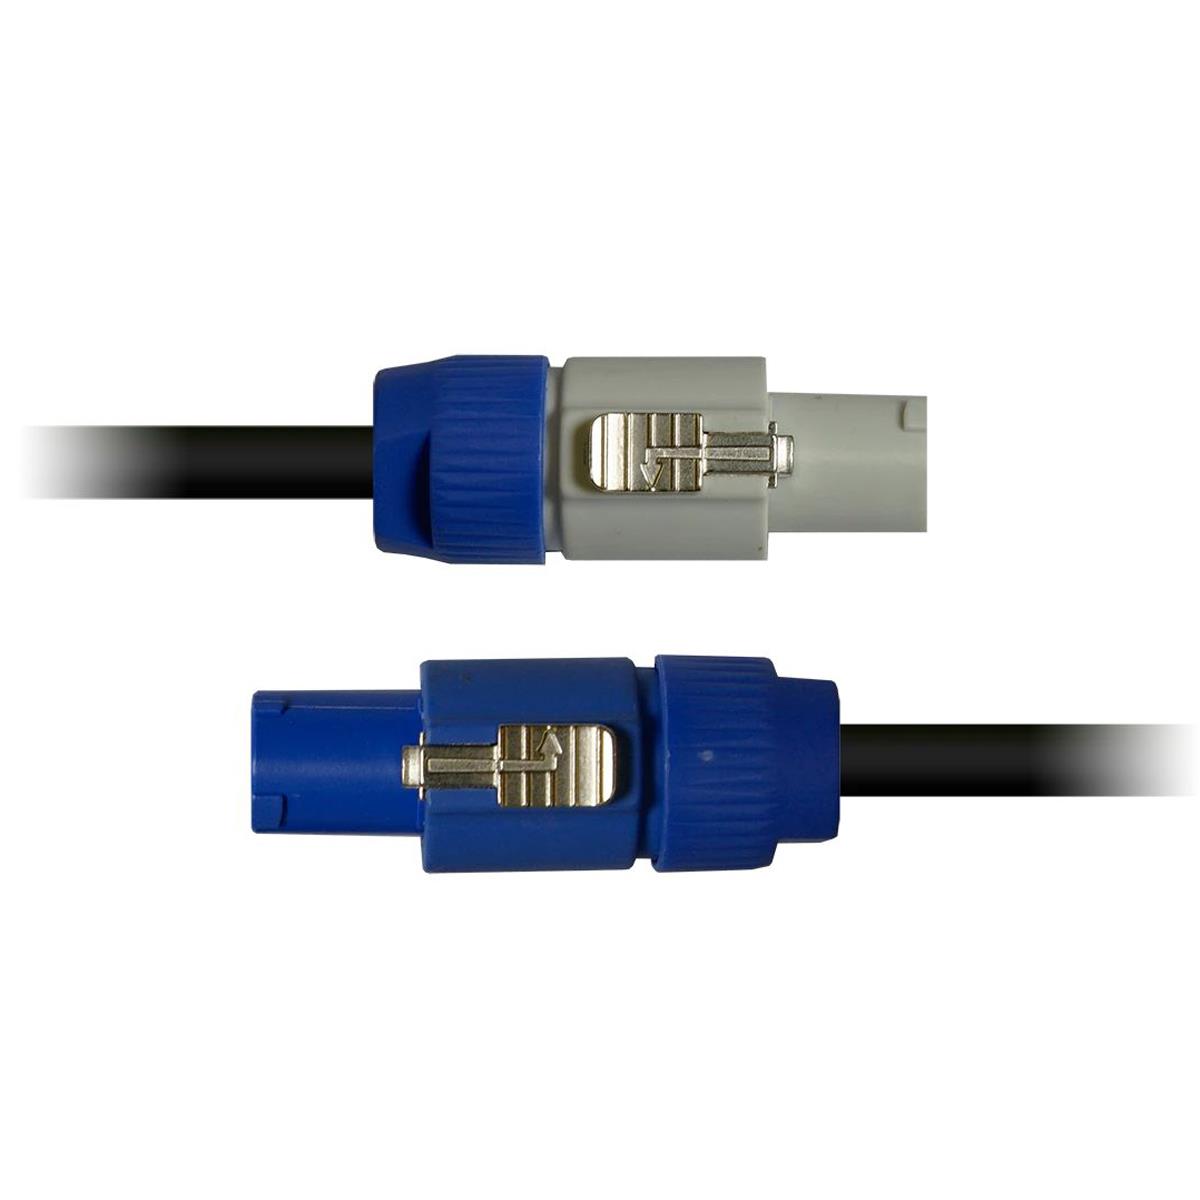 Image of Blizzard Lighting Cool Cable 10' PowerCON to PowerCON Interconnect Power Cable